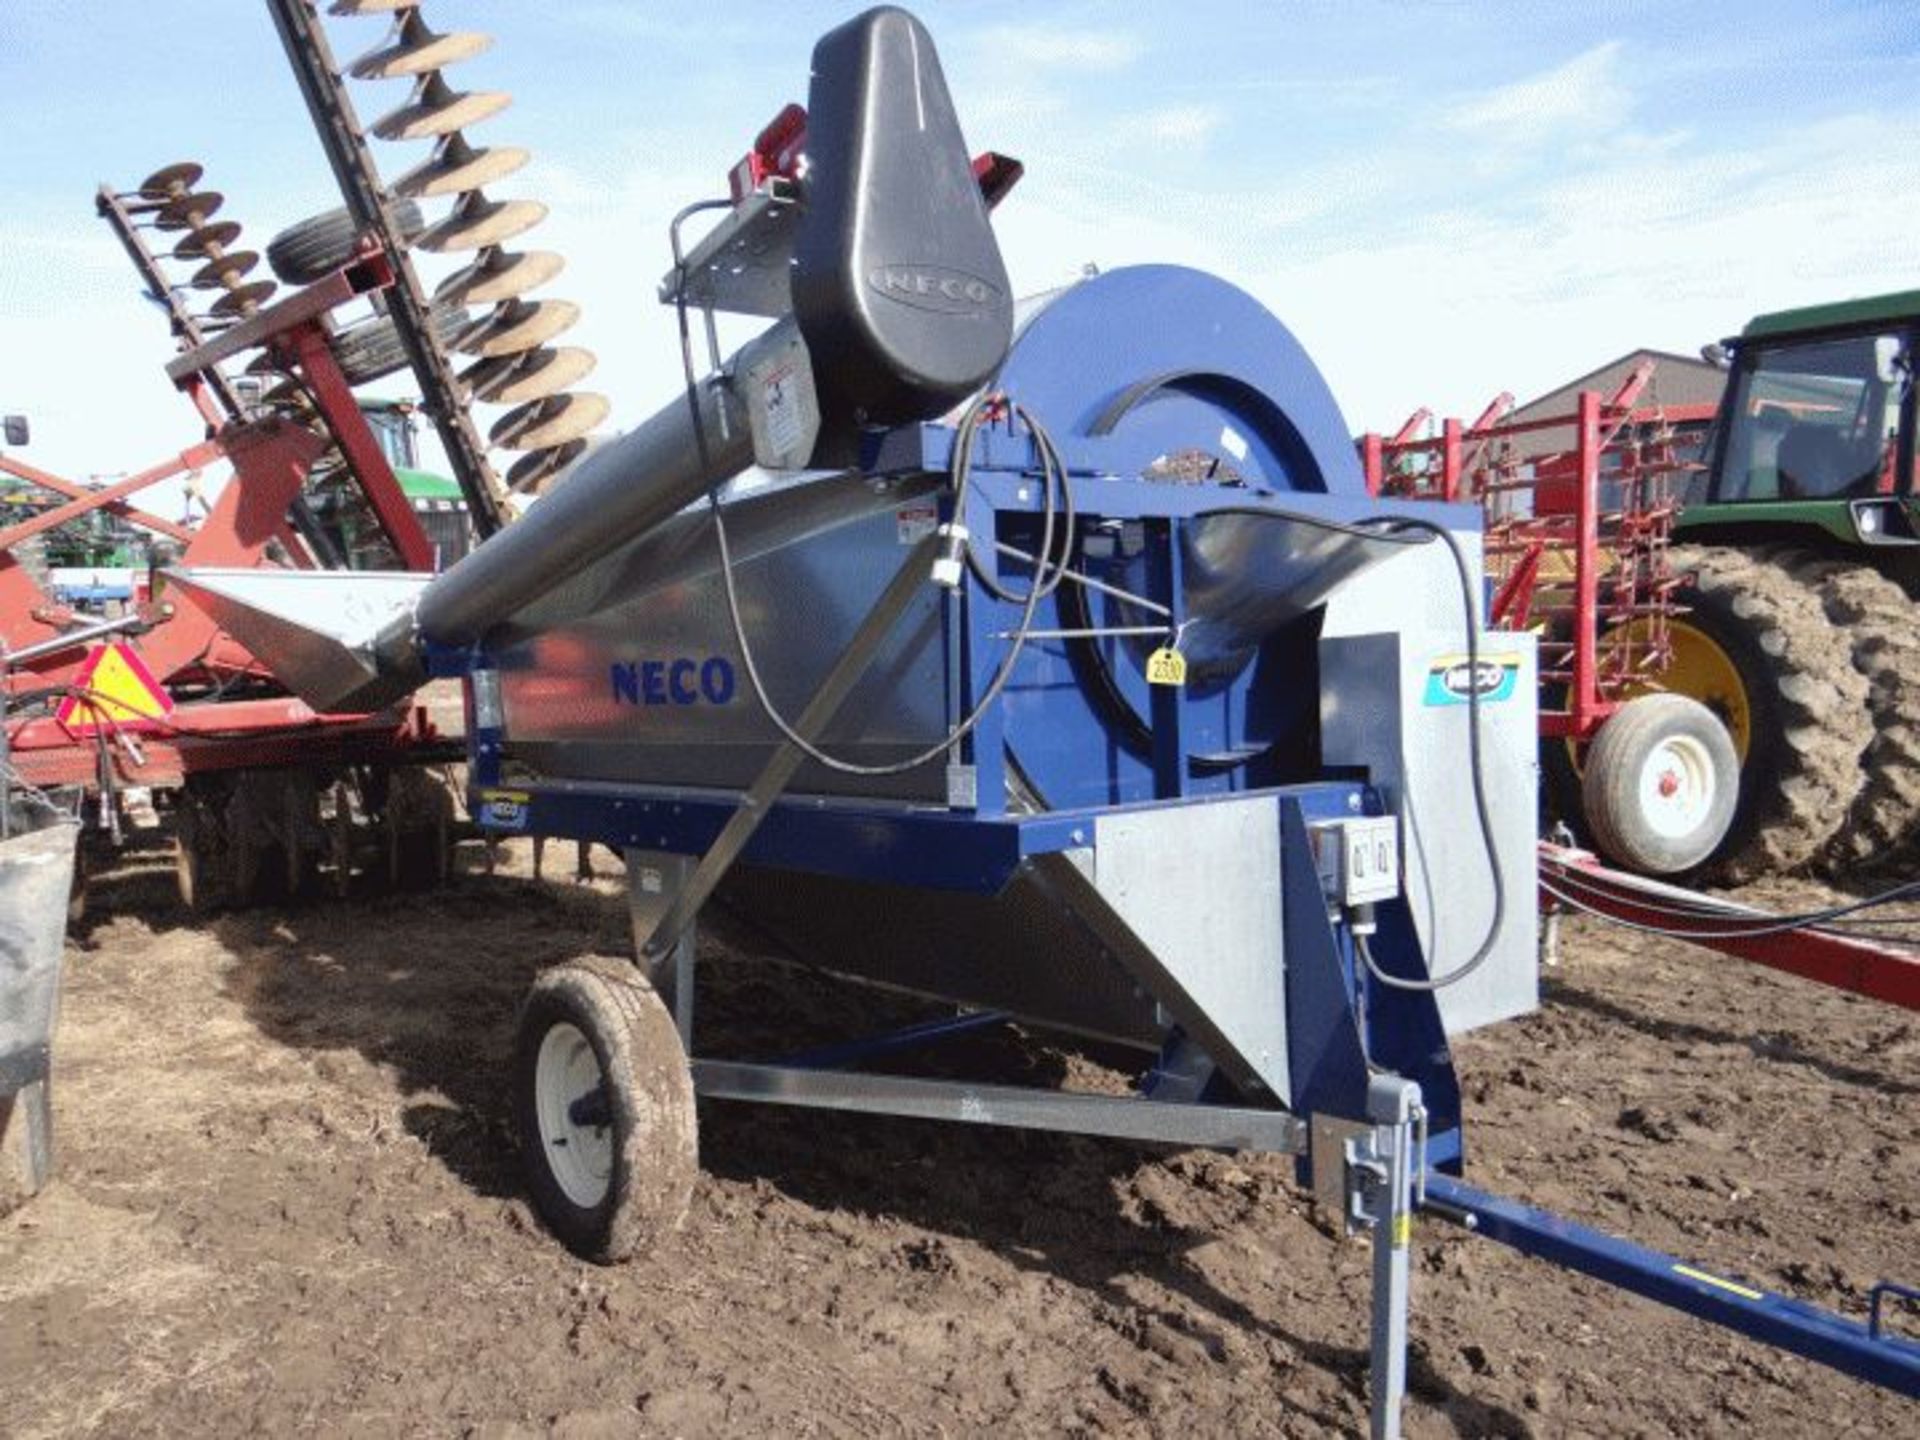 Lot # 2310 New Neco Rotary Grain Cleaner Elec Motor, Auger for In Grain and Out Grain, Neven Been - Image 2 of 2